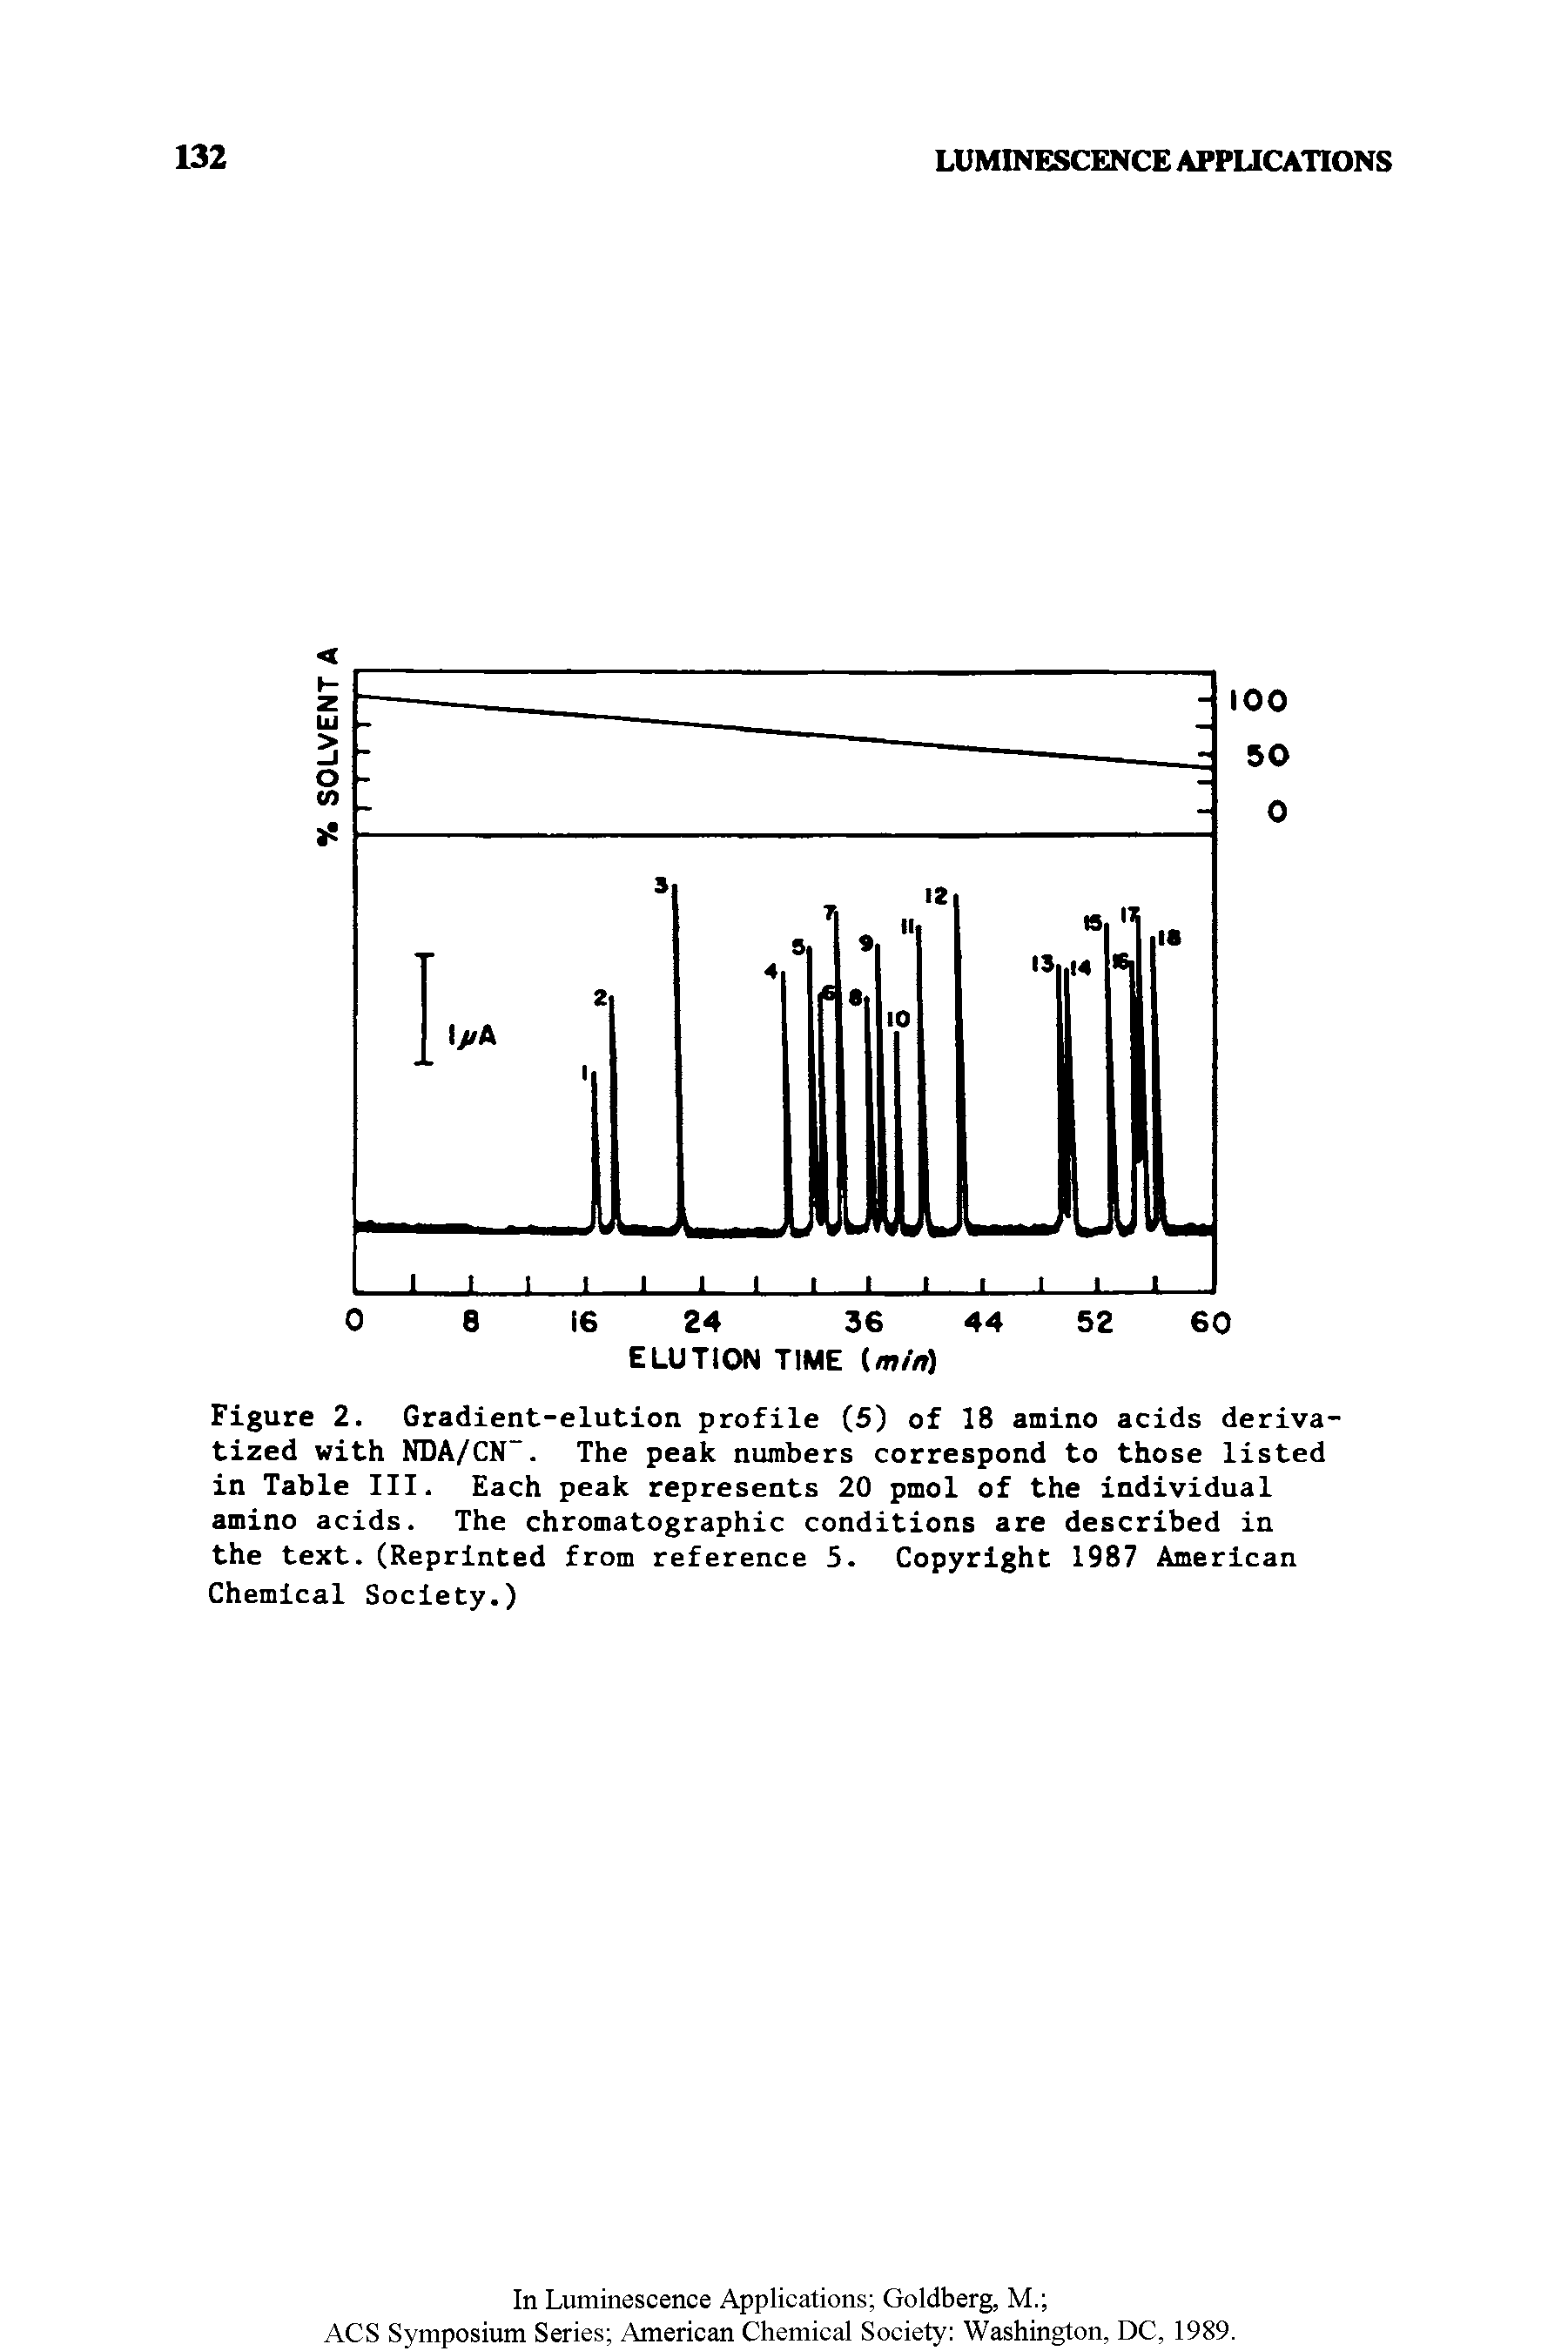 Figure 2. Gradient-elution profile (5) of 18 amino acids deriva-tized with NDA/CN . The peak numbers correspond to those listed in Table III. Each peak represents 20 pmol of the individual amino acids. The chromatographic conditions are described in the text.(Reprinted from reference 5. Copyright 1987 American Chemical Society.)...